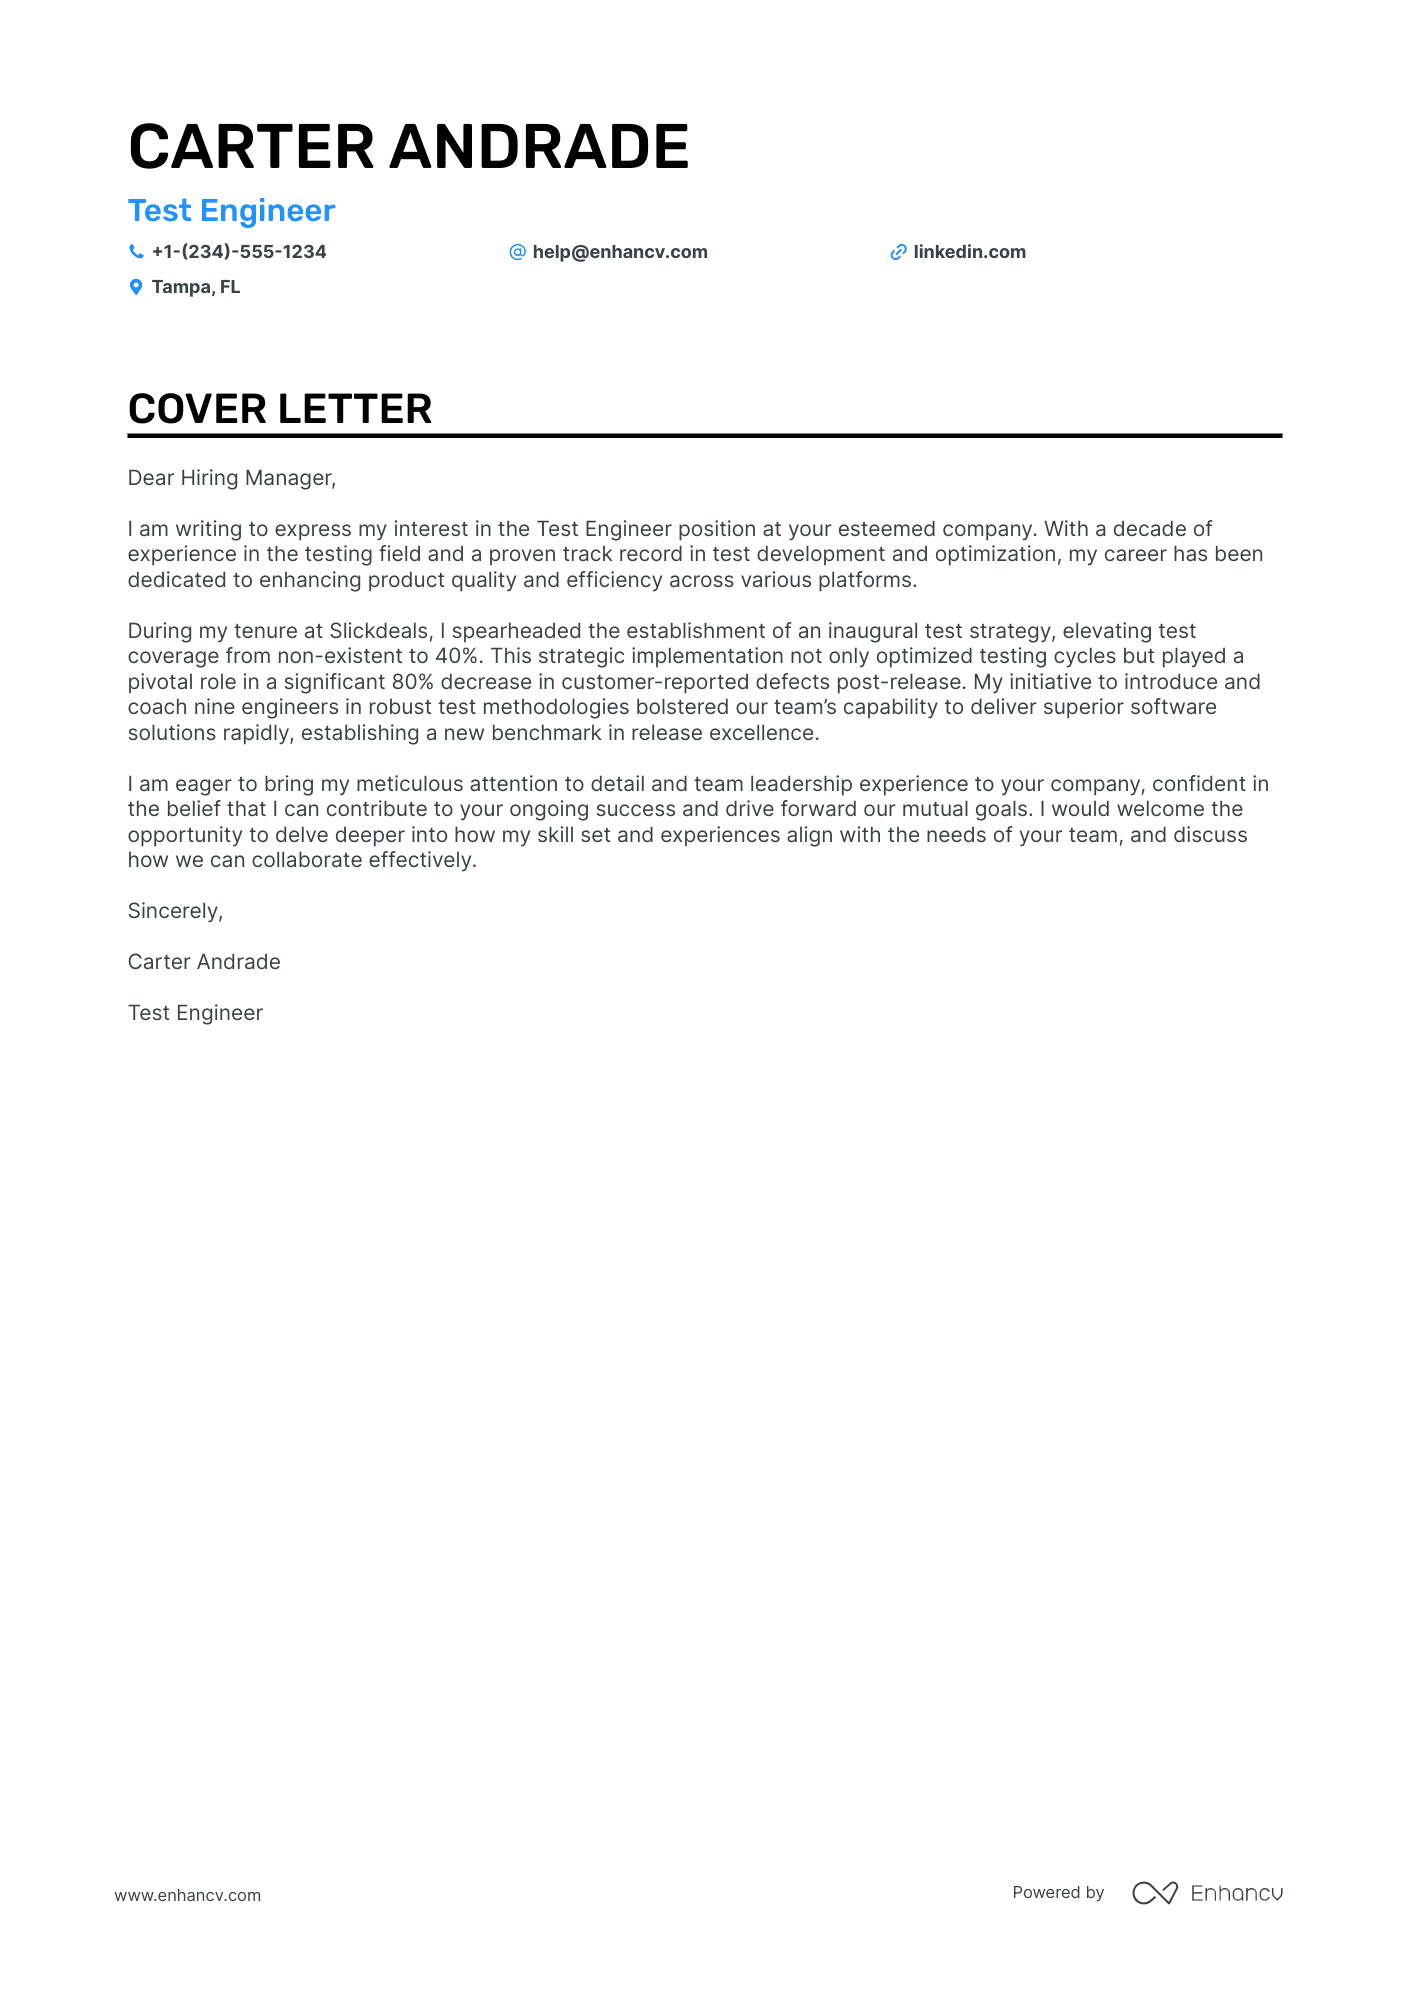 Test Engineer cover letter